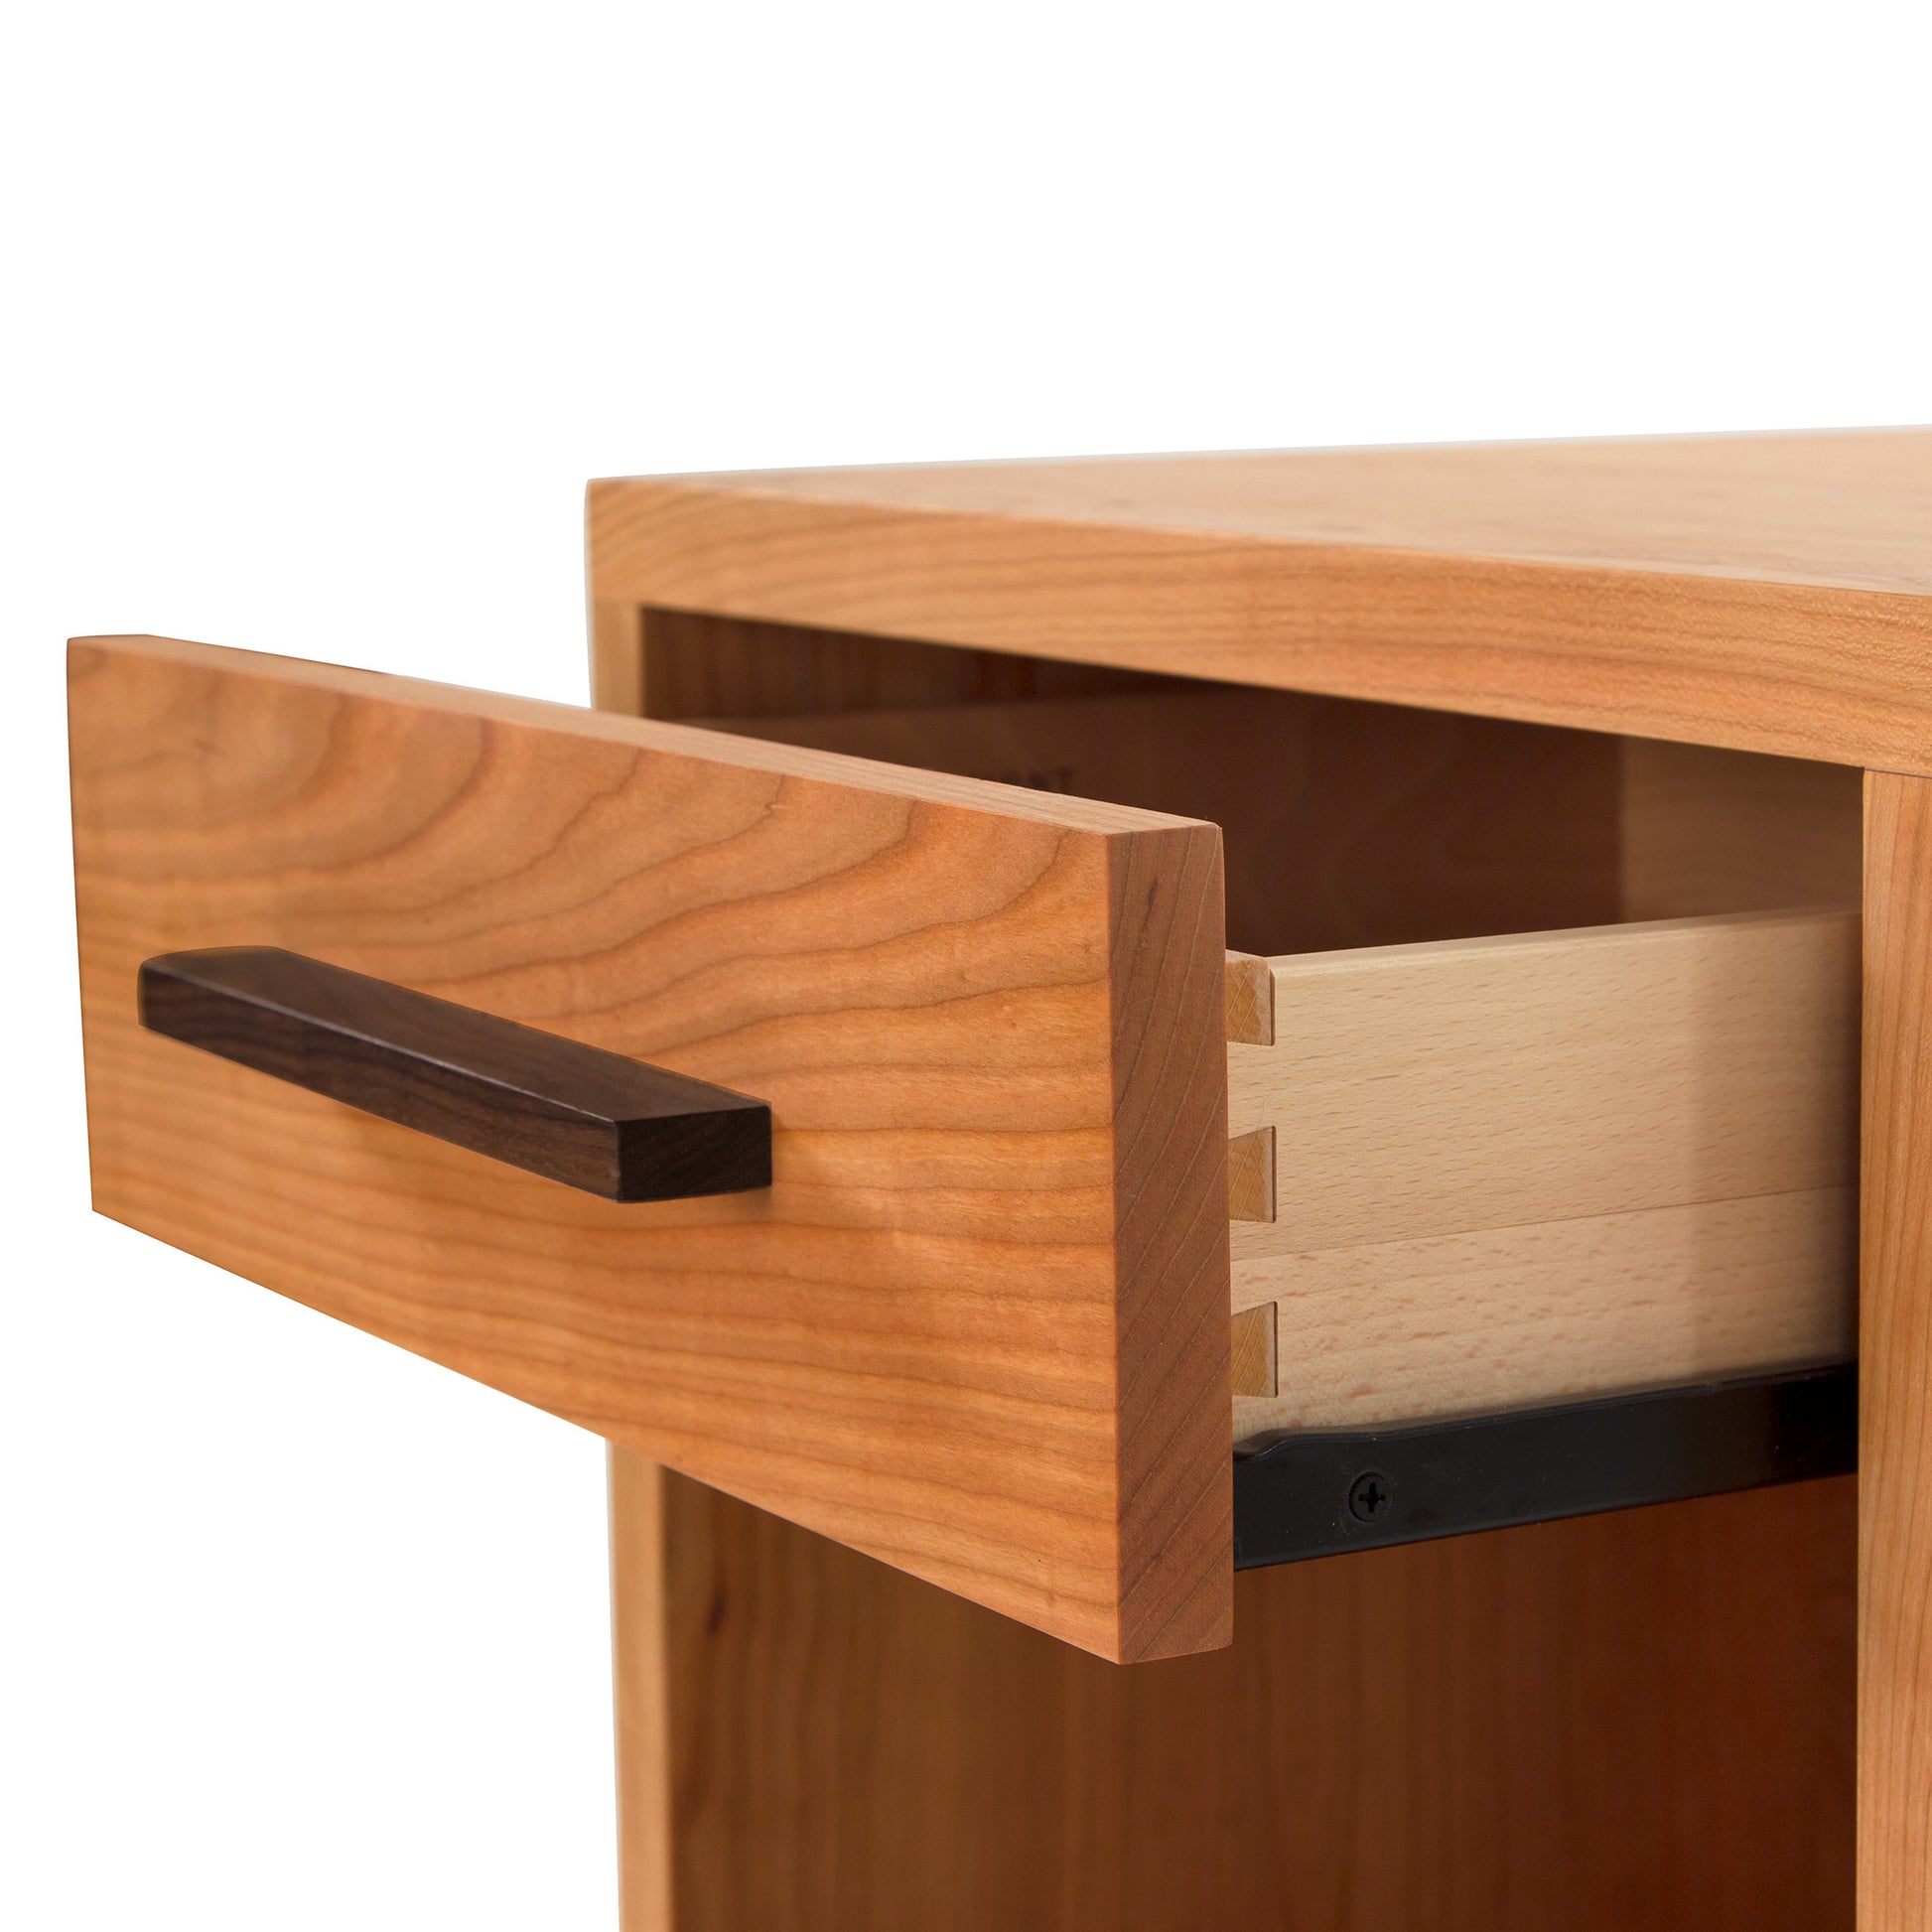 A close-up view of an open Vermont Furniture Designs Modern American 1-Drawer Enclosed Shelf Nightstand featuring a dovetail joint, highlighting intricate craftsmanship and a dark wood handle against a white background.